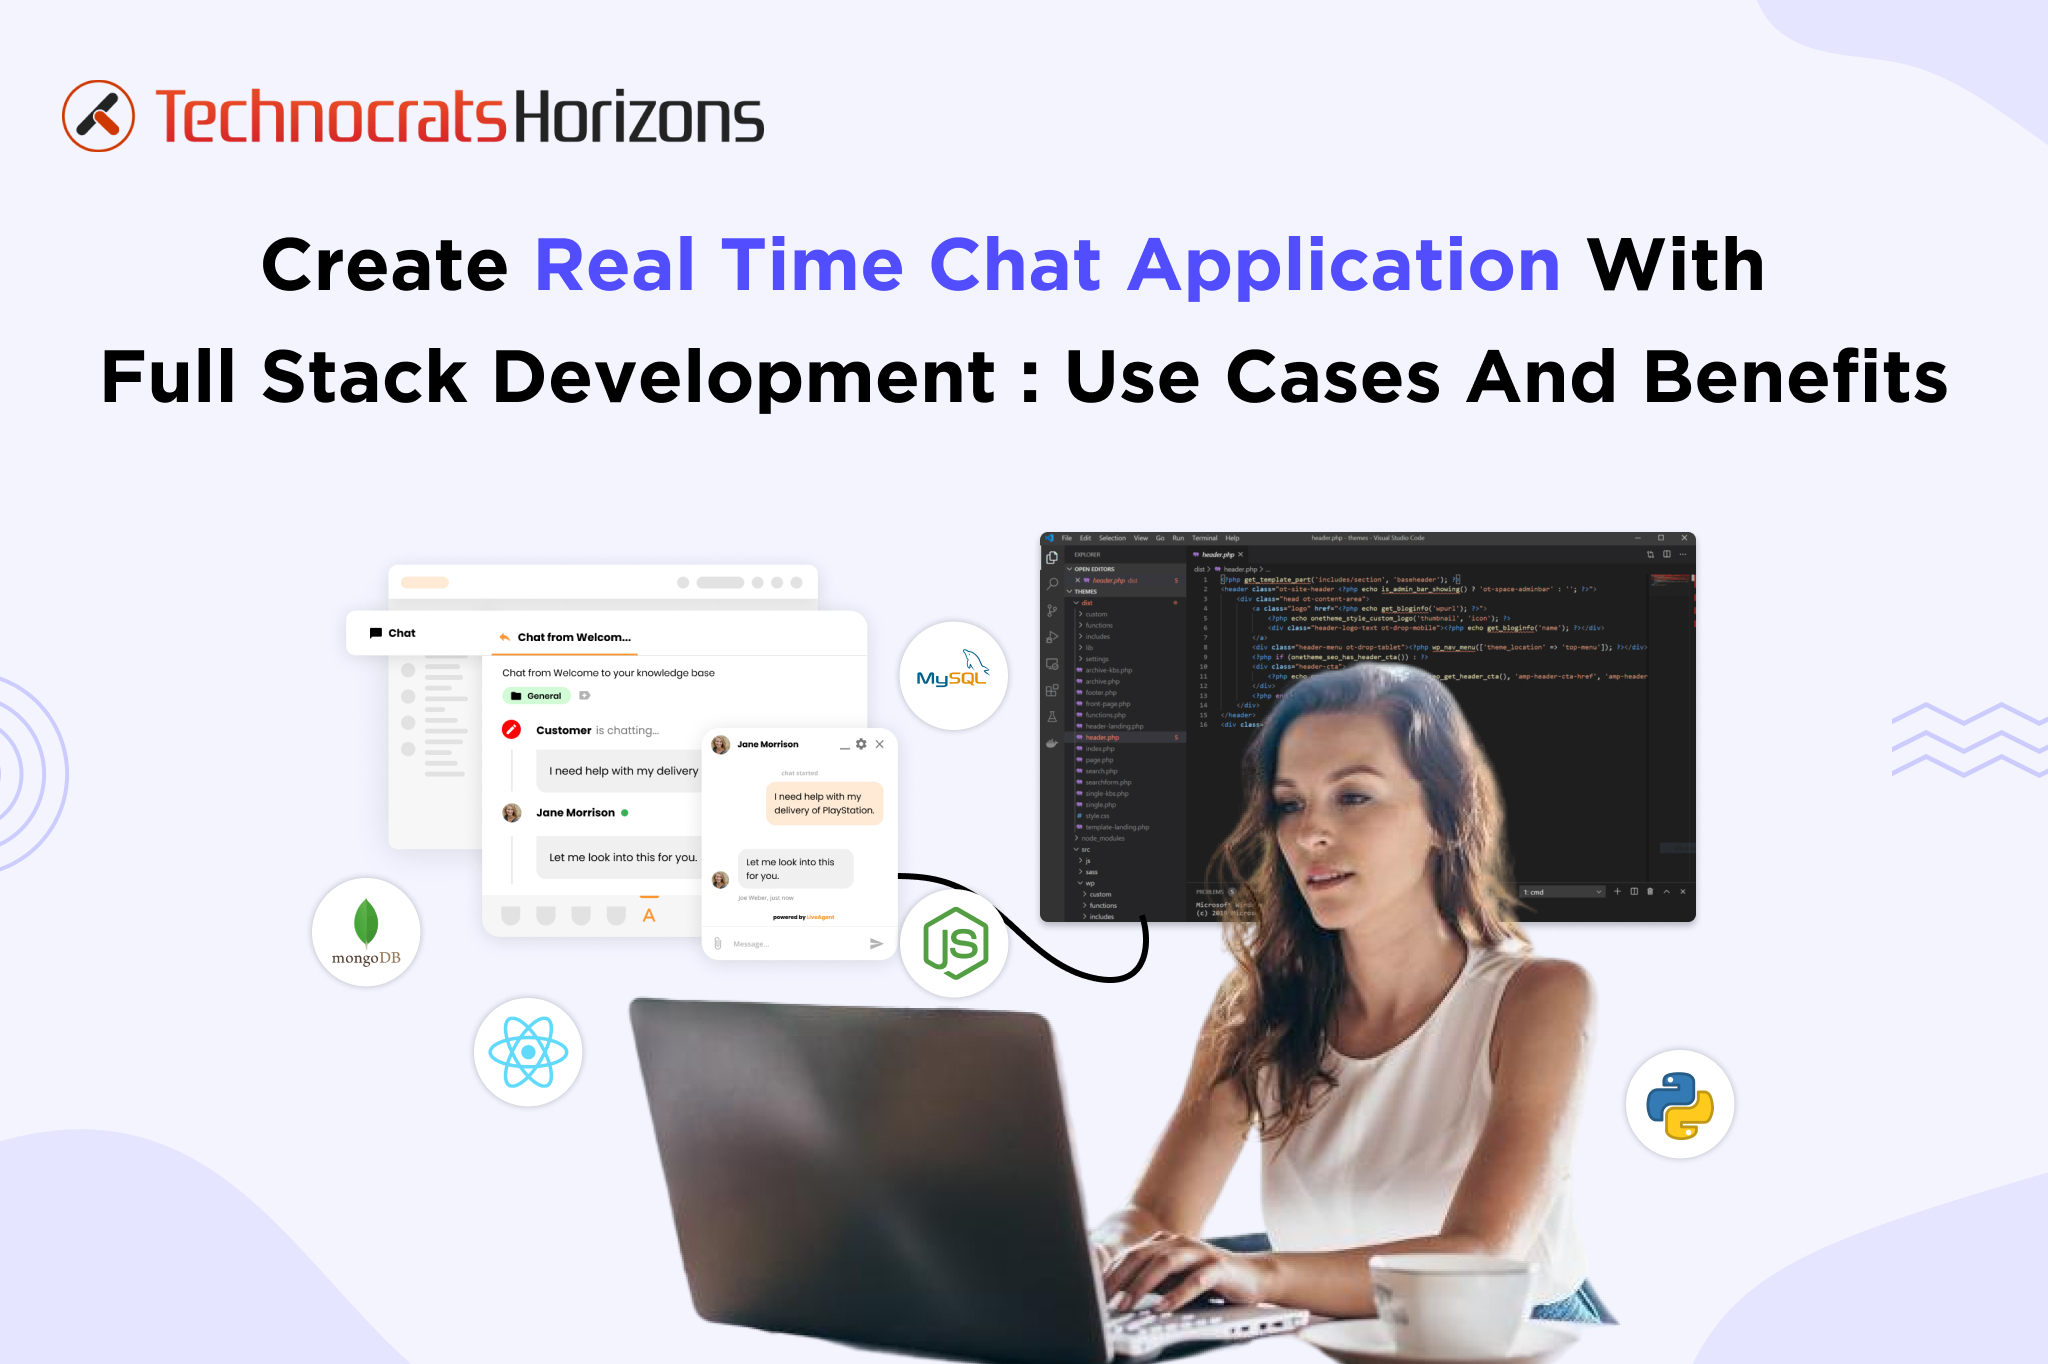 Create Real-Time Chat Application with Full Stack Development: Use Cases and Benefits